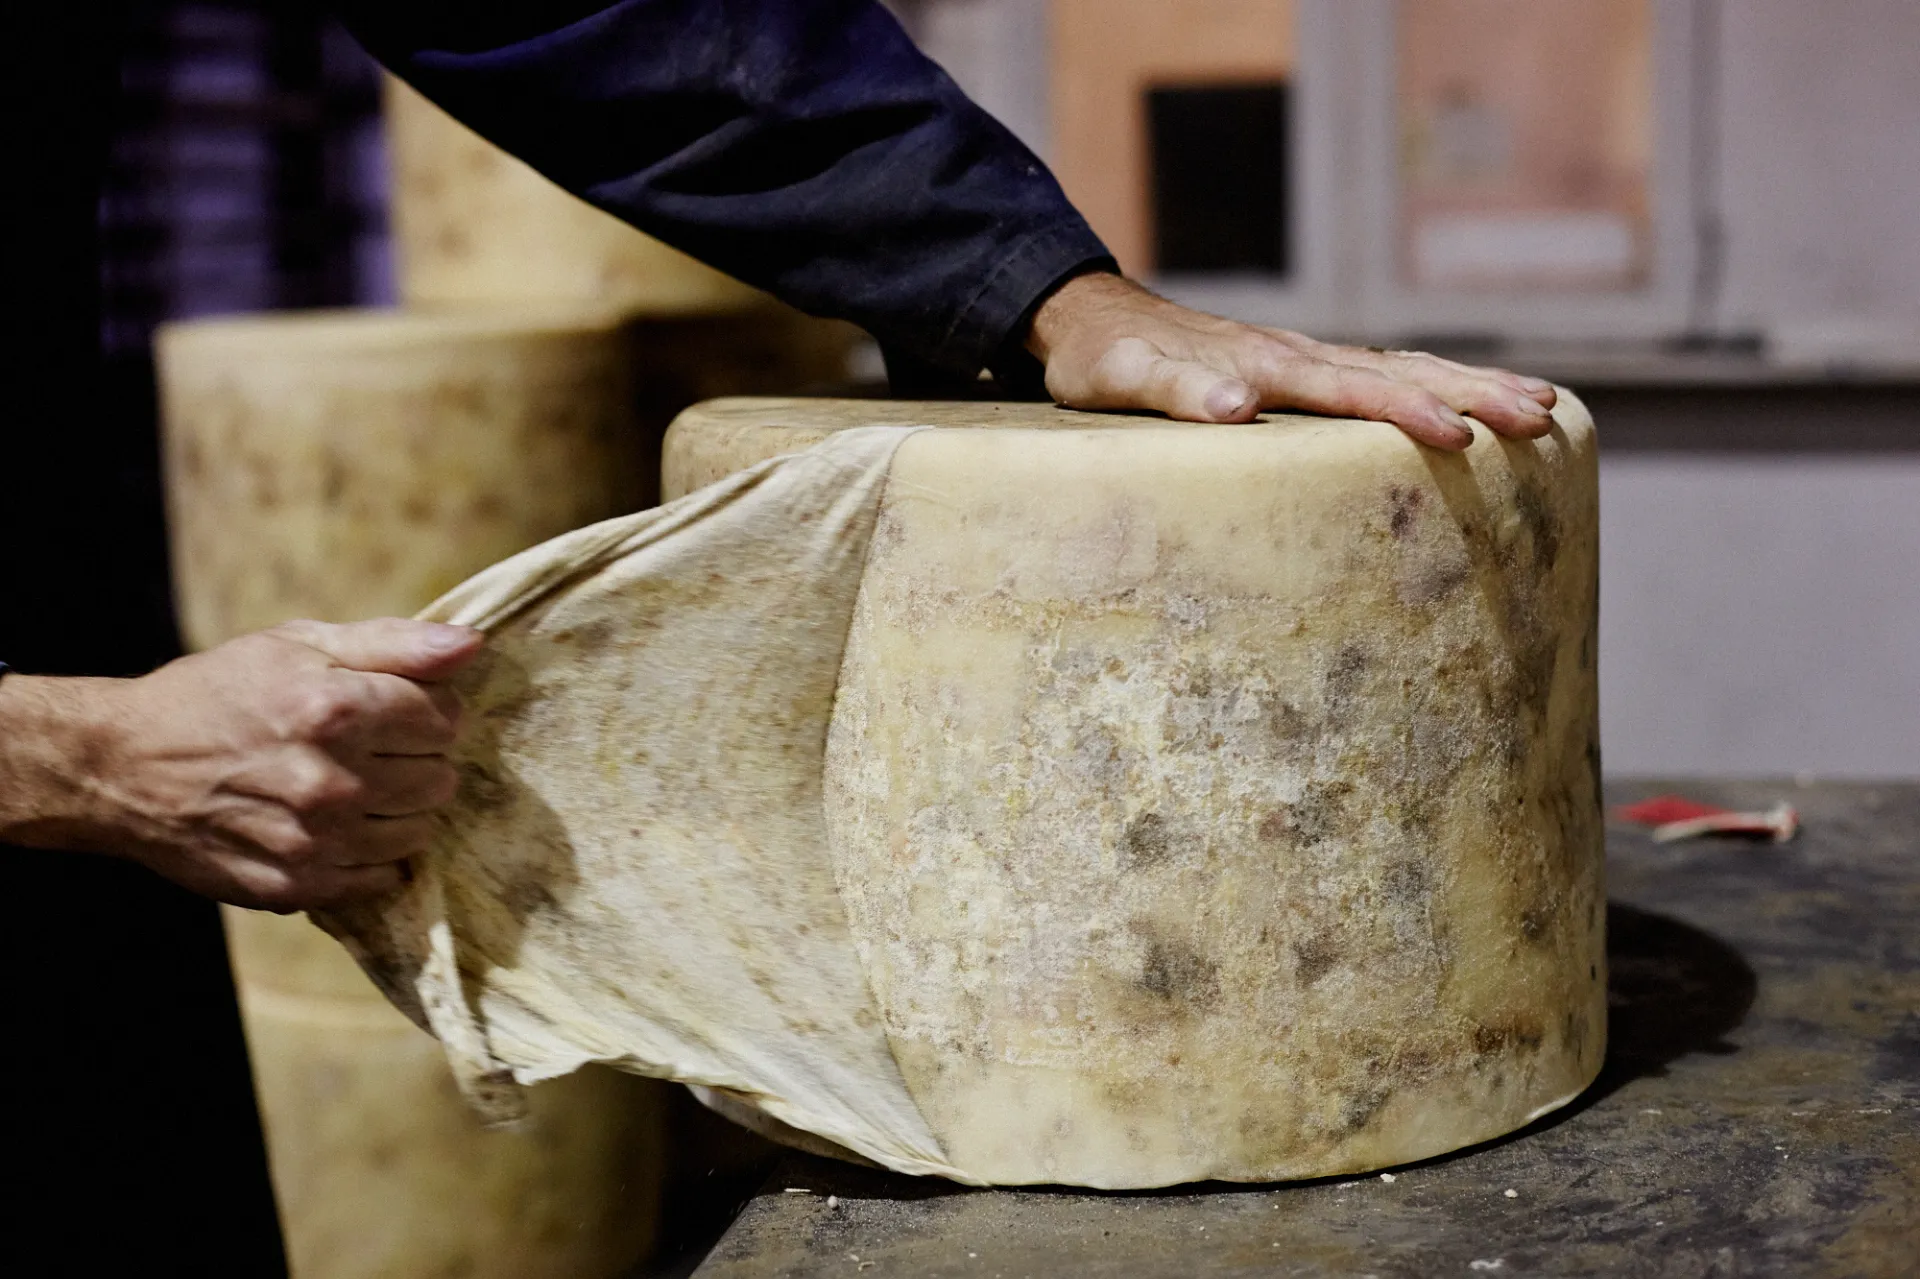 Traditional clothbound cheddar is wrapped in layers of muslin, not plastic. Credit: Matt Austin.